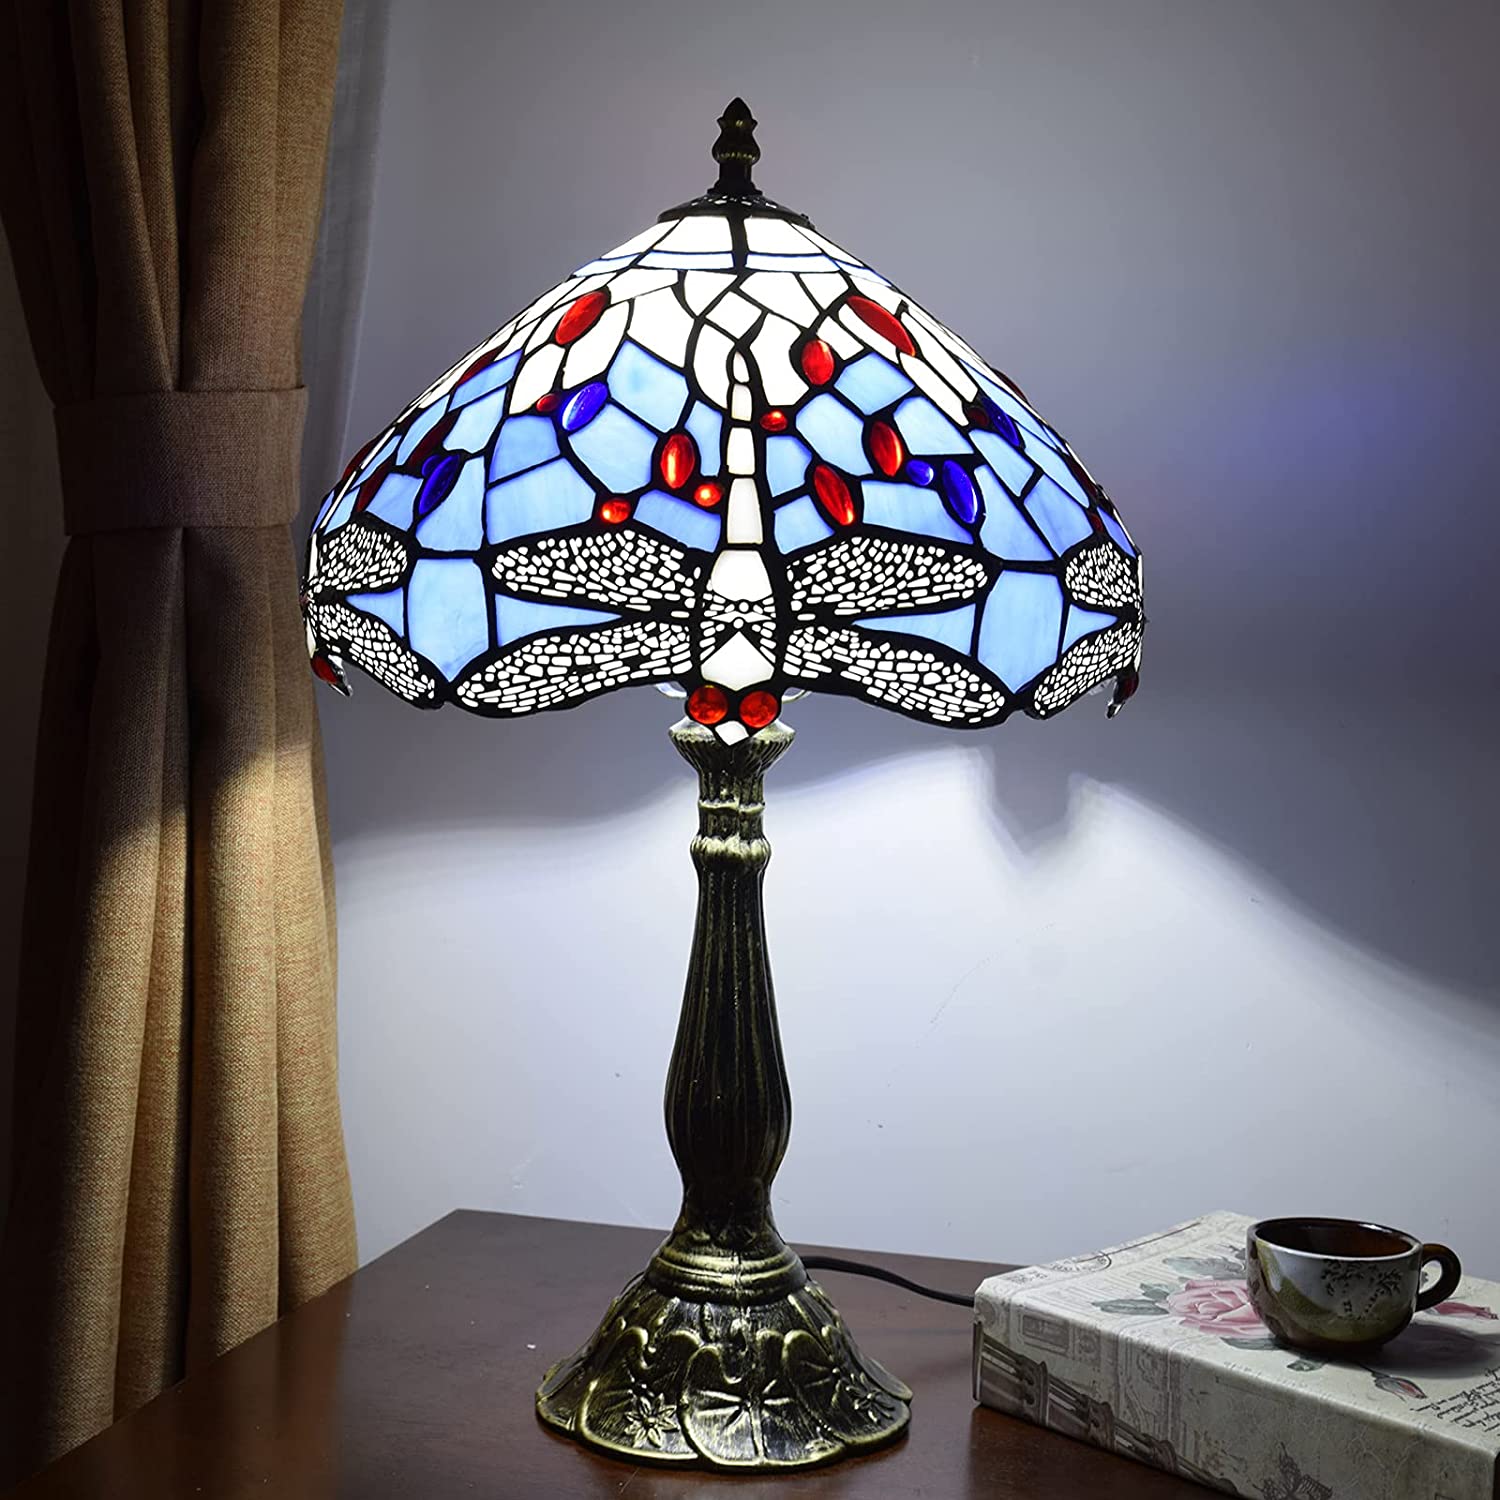 SHADY  Lamp Stained Glass Lamp Dragonfly Blue Bedroom Table Lamp Reading Desk Light for Bedside Living Room Office Dormitory Dining Room Decorate  12x12x18 Include Light Bulb